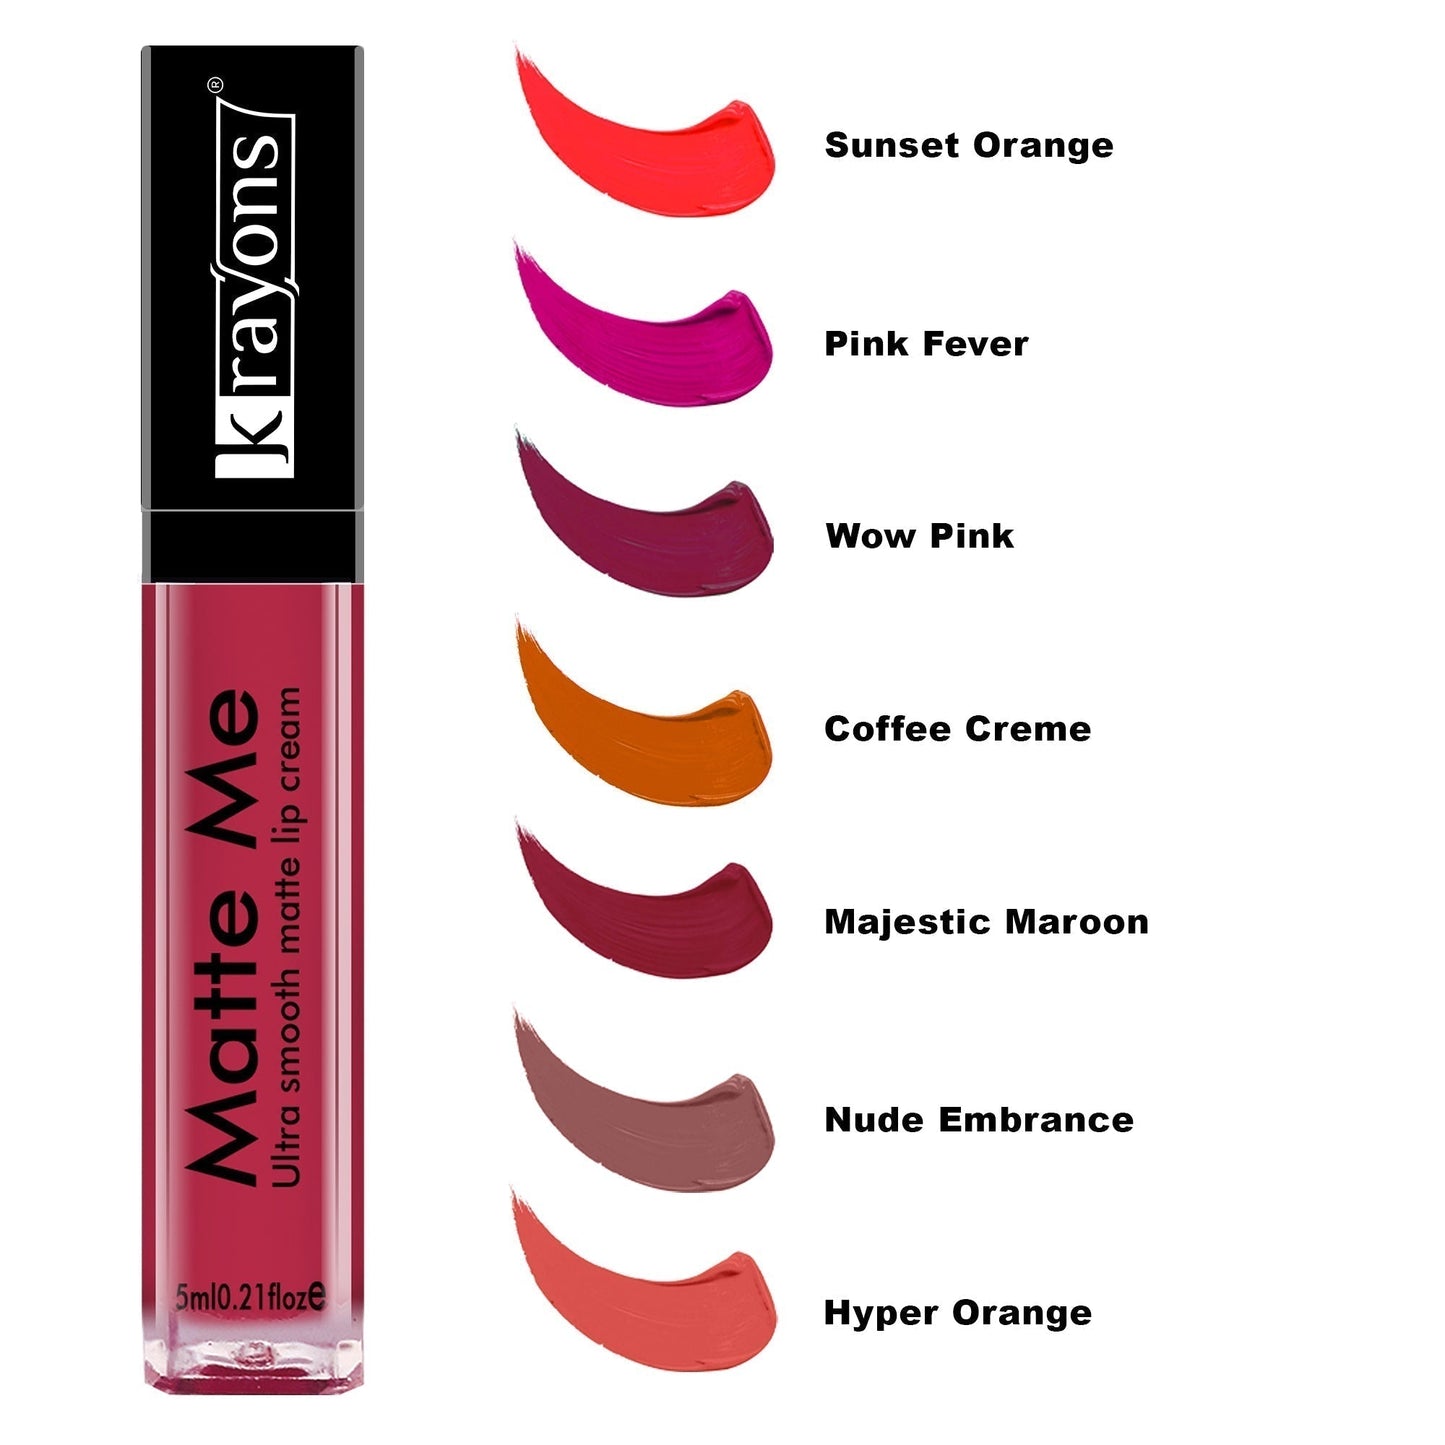 Krayons Matte Me Ultra Smooth Matte Liquid Lip Color, Mask Proof, Waterproof, Longlasting, 5ml Each, Combo, Pack of 2 (Pink Fever, Wow Pink)